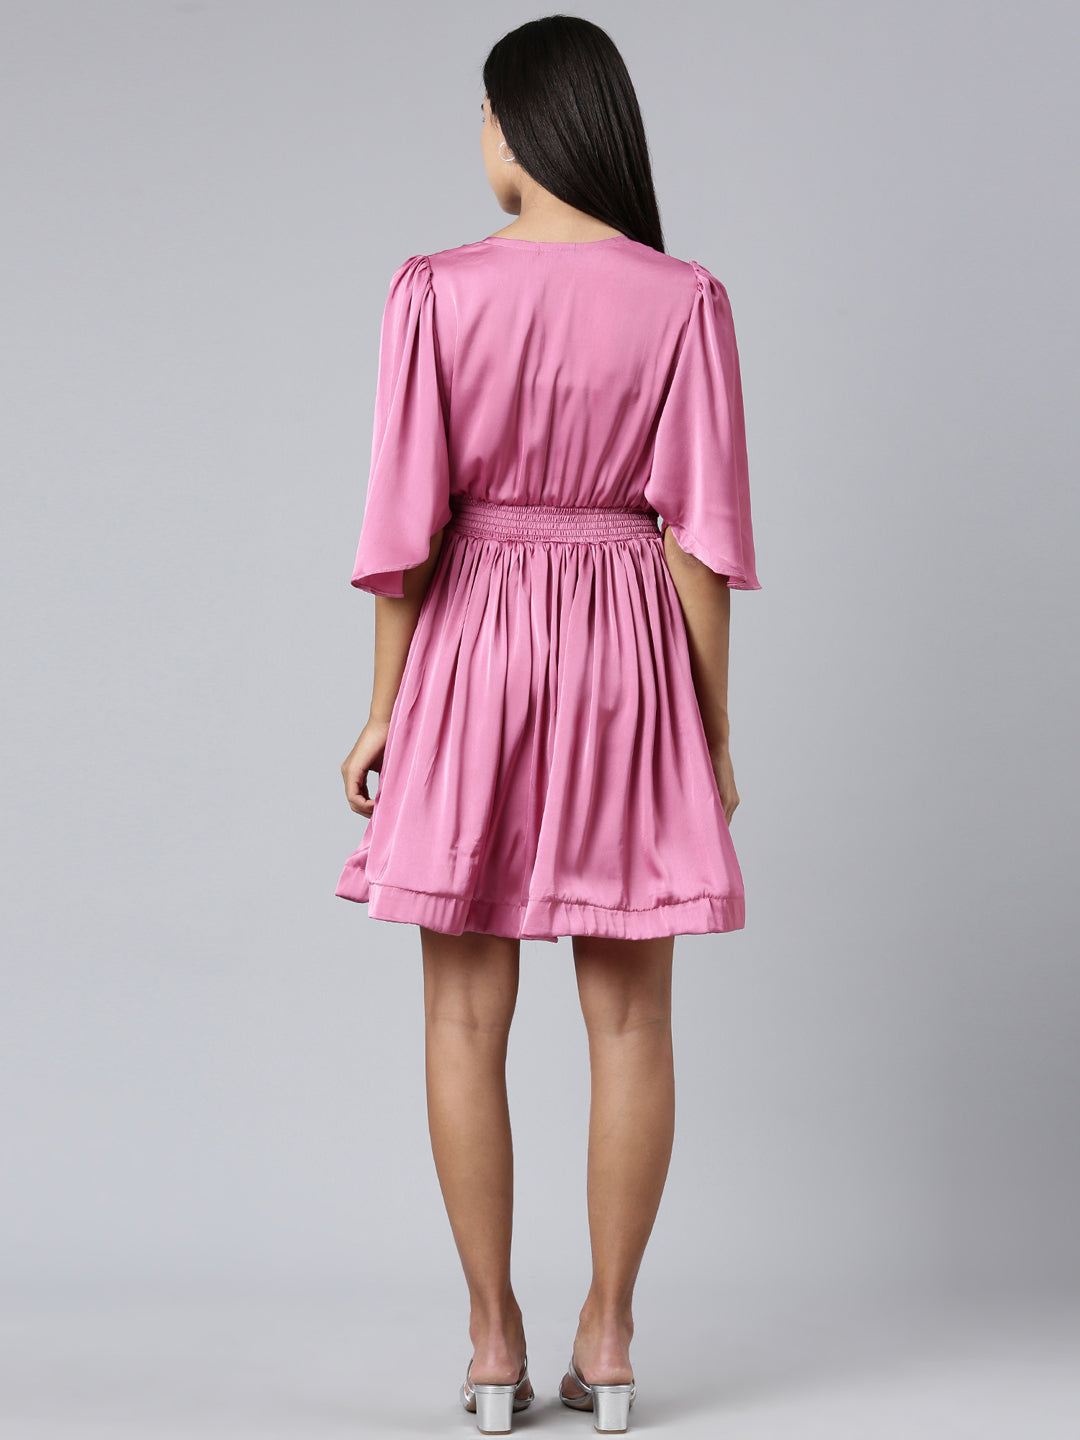 Women V-Neck Solid Fit and Flare Pink Dress